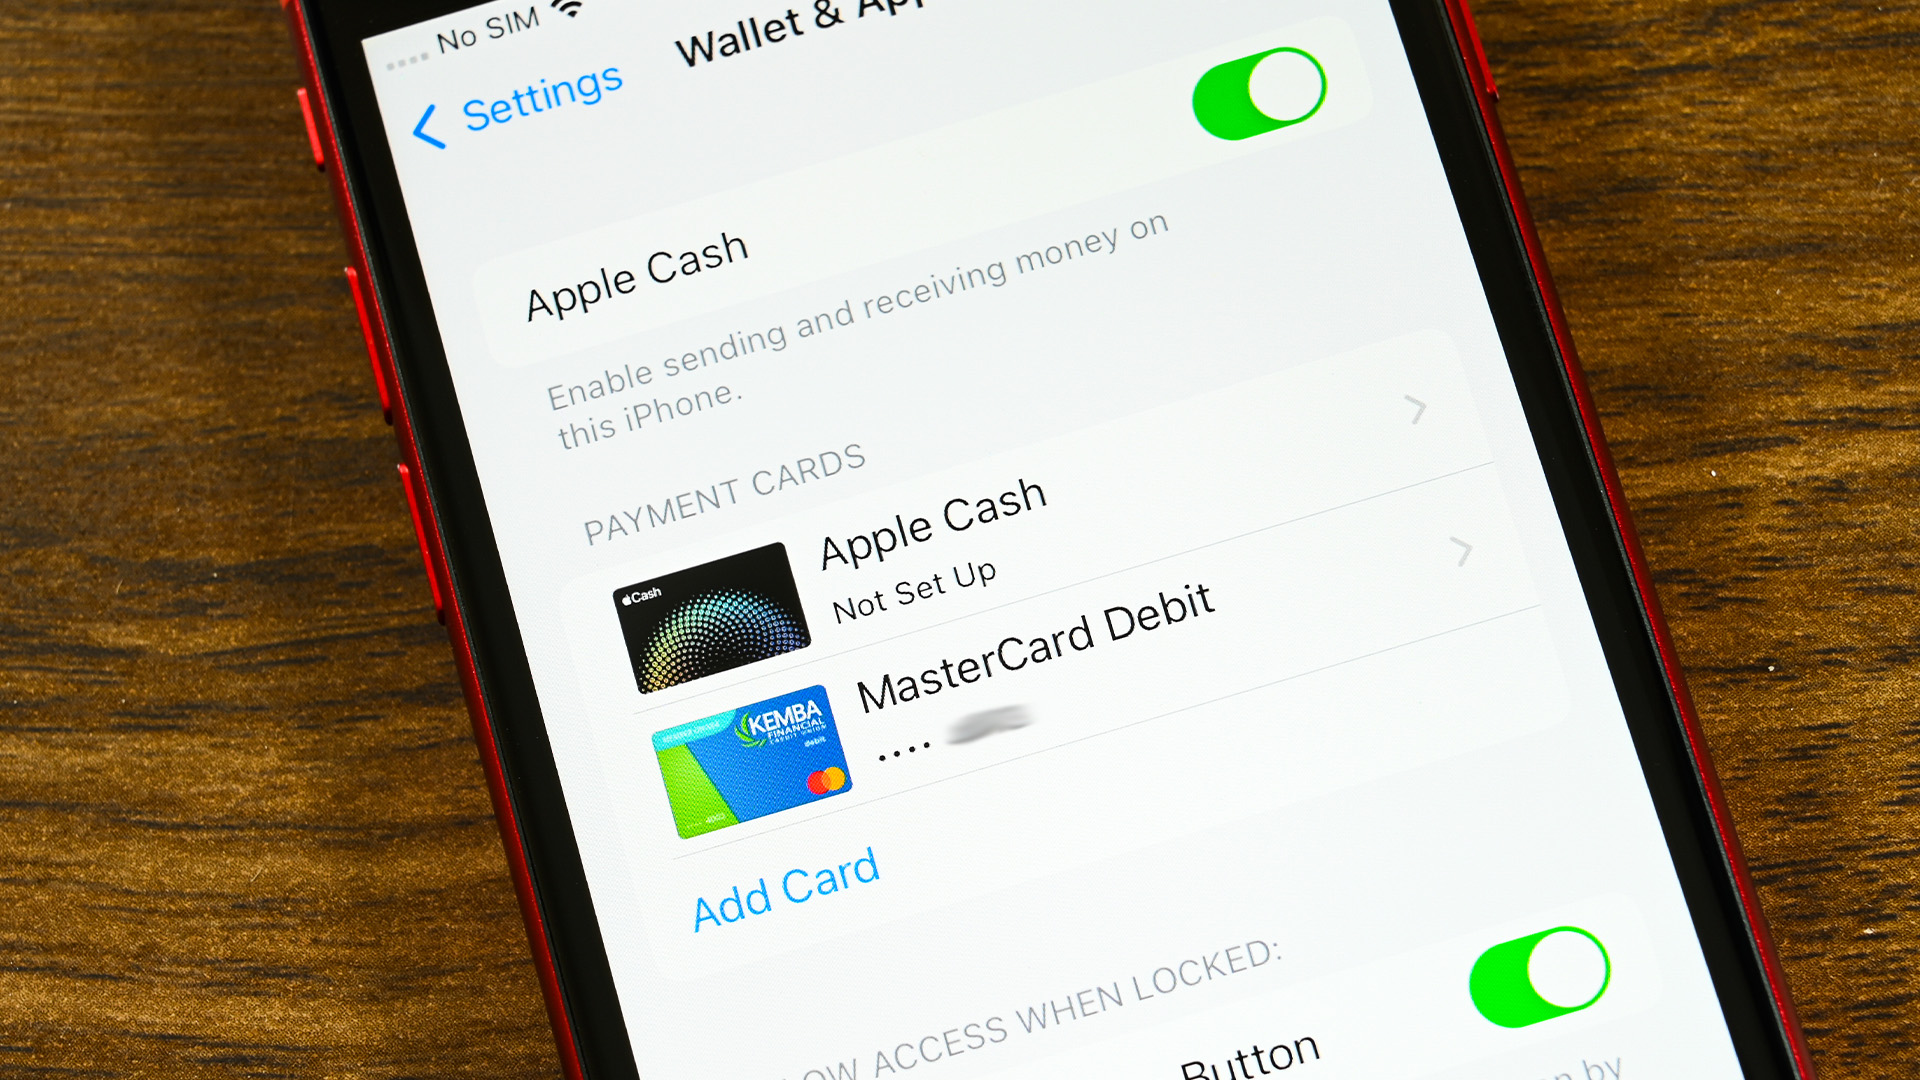 A smartphone showing the Apple Pay app's settings page with various payment methods and the option to add a card.